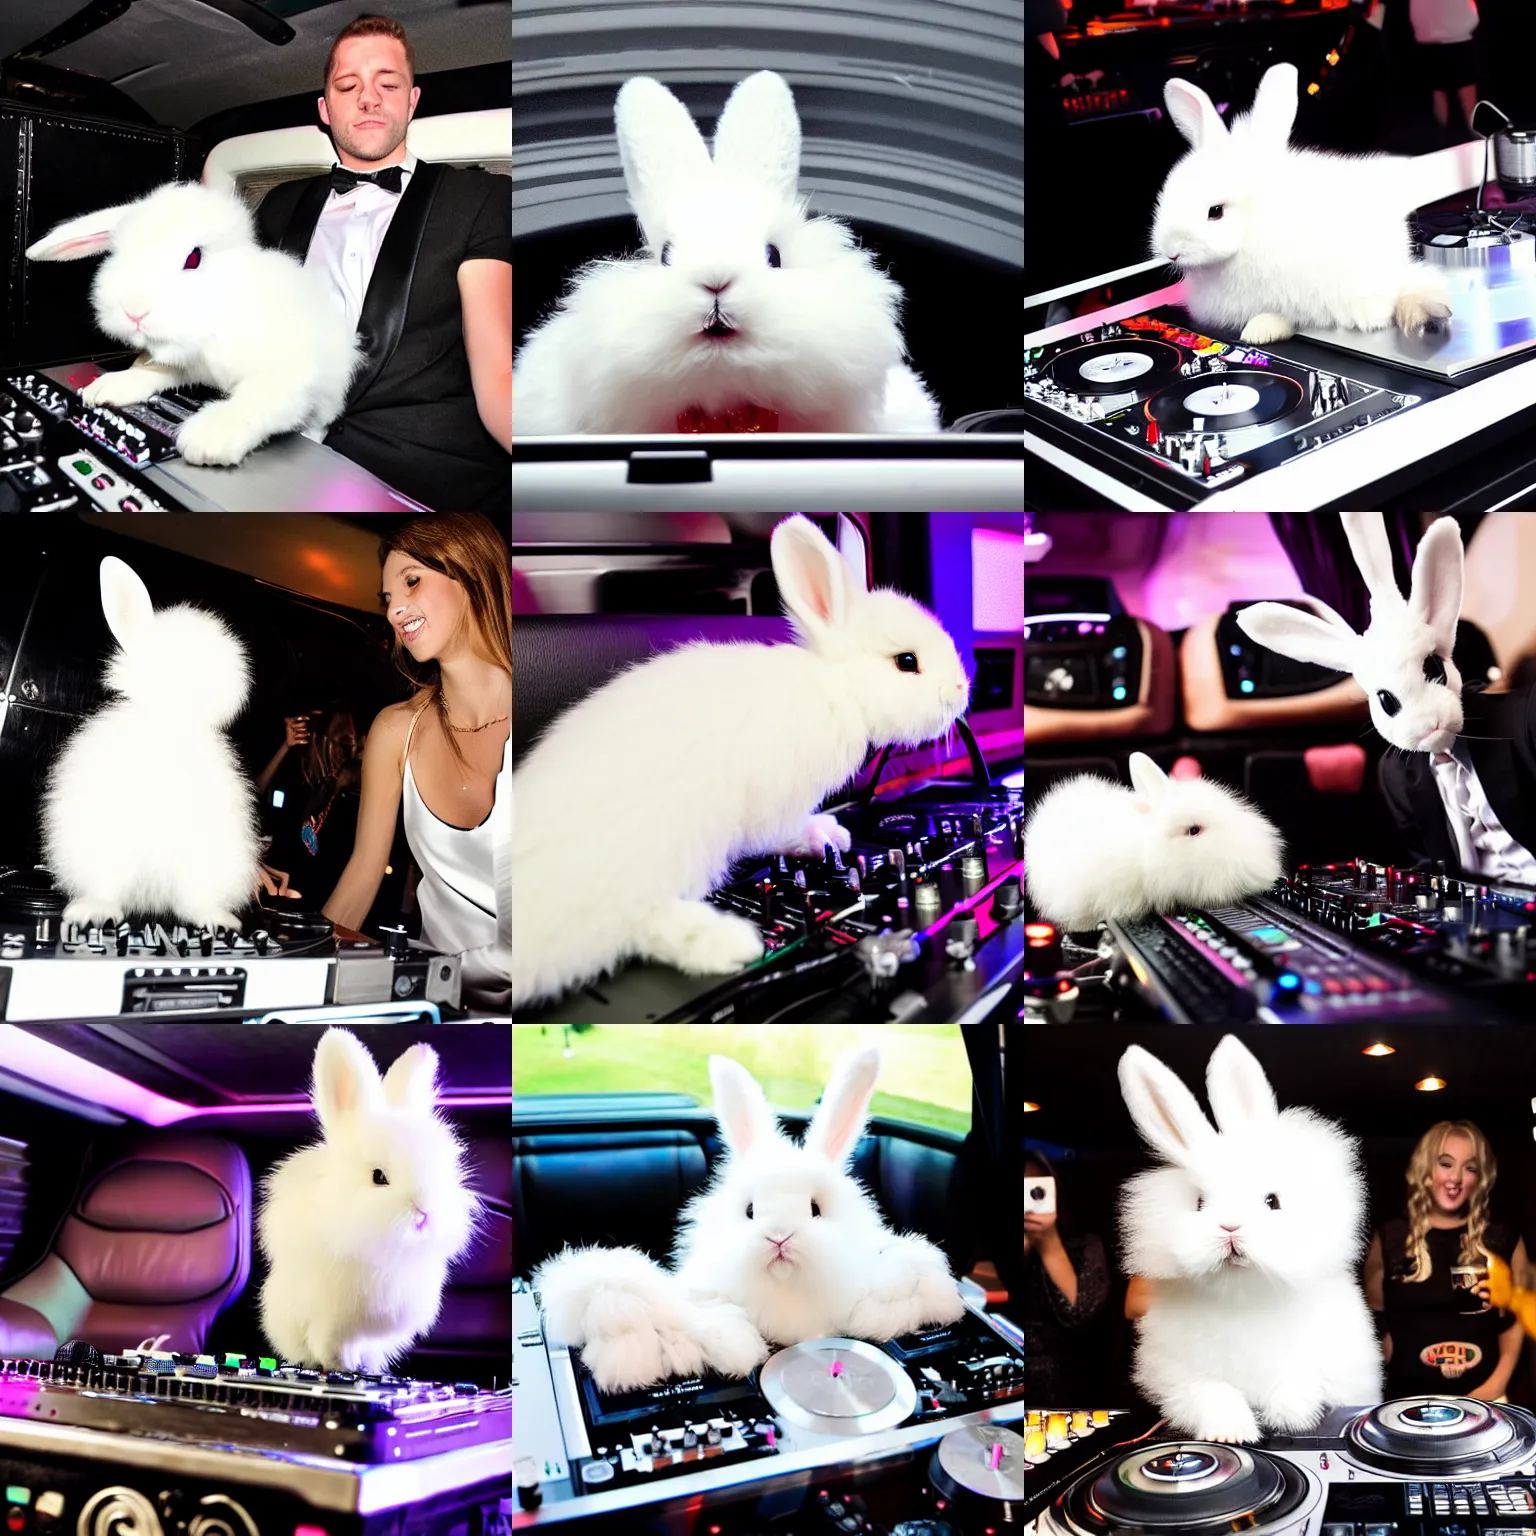 Prompt: super cute fluffy white bunny rabbit in the back of a limo DJing with DJ turntables, photoreal